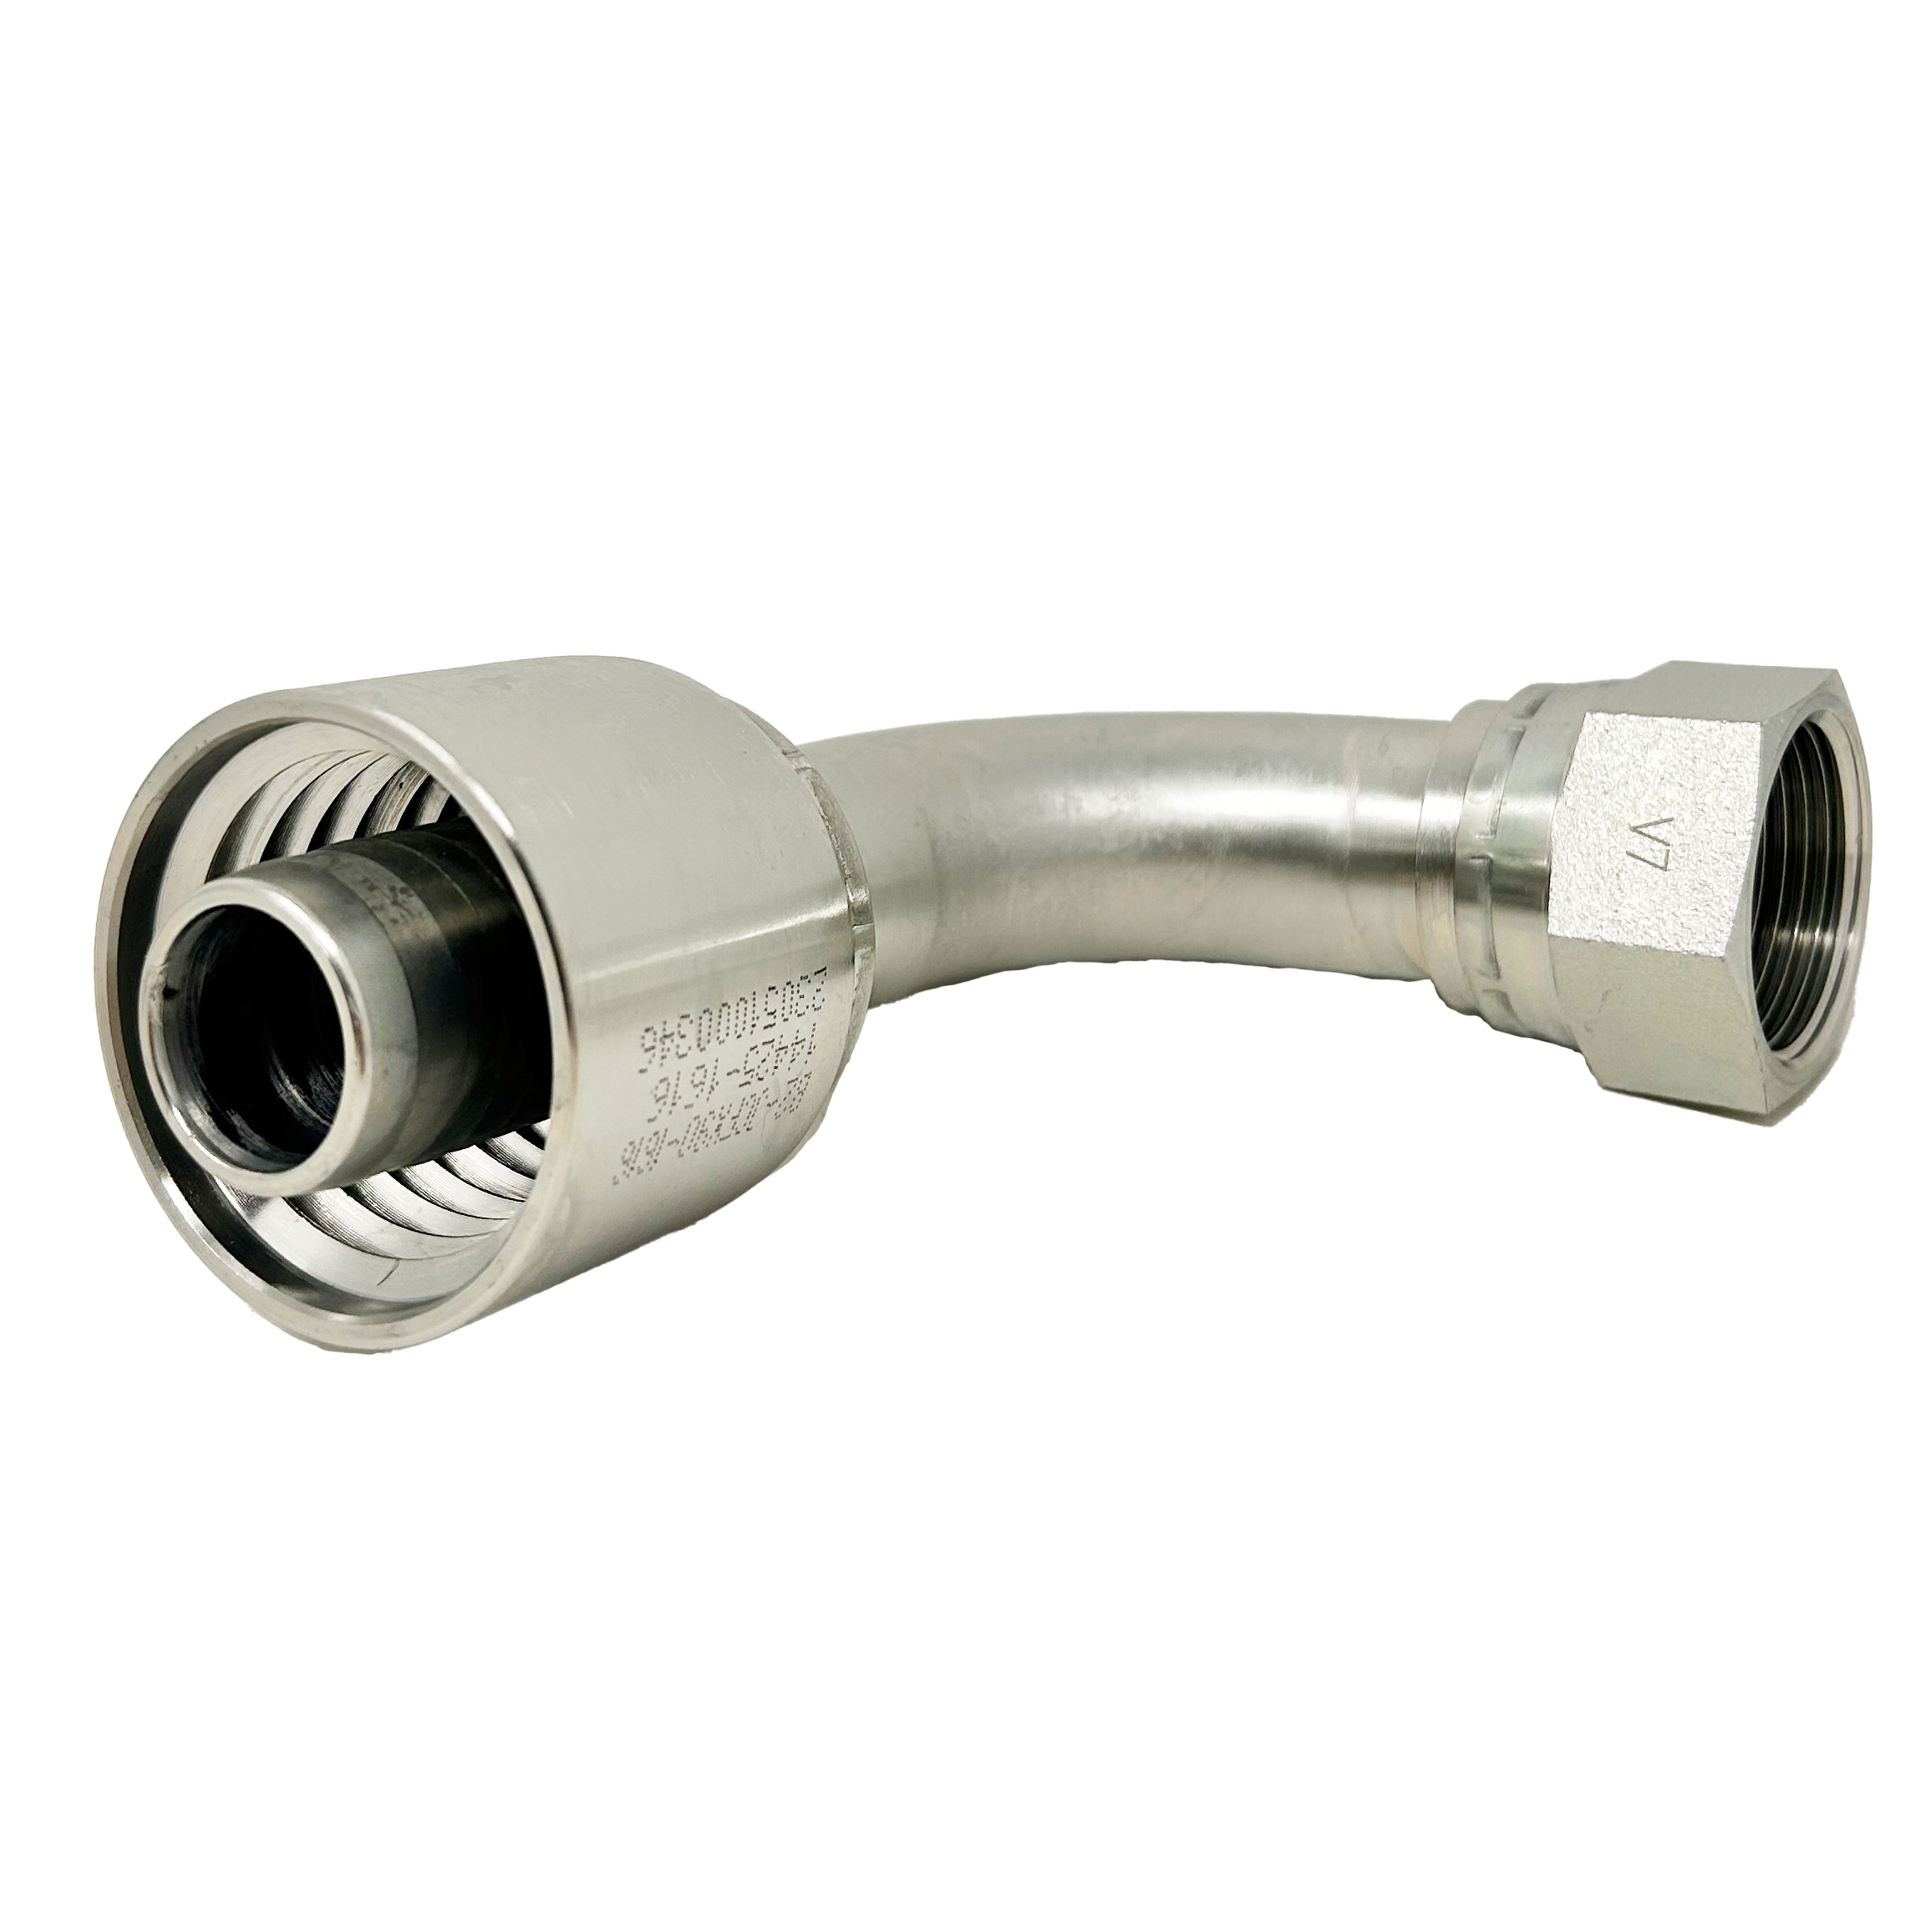 B2-JCFX90-0810: Continental Hose Fitting, 0.5 (1/2") Hose ID x 7/8-14 Female JIC, 90-Degree Swivel Connection